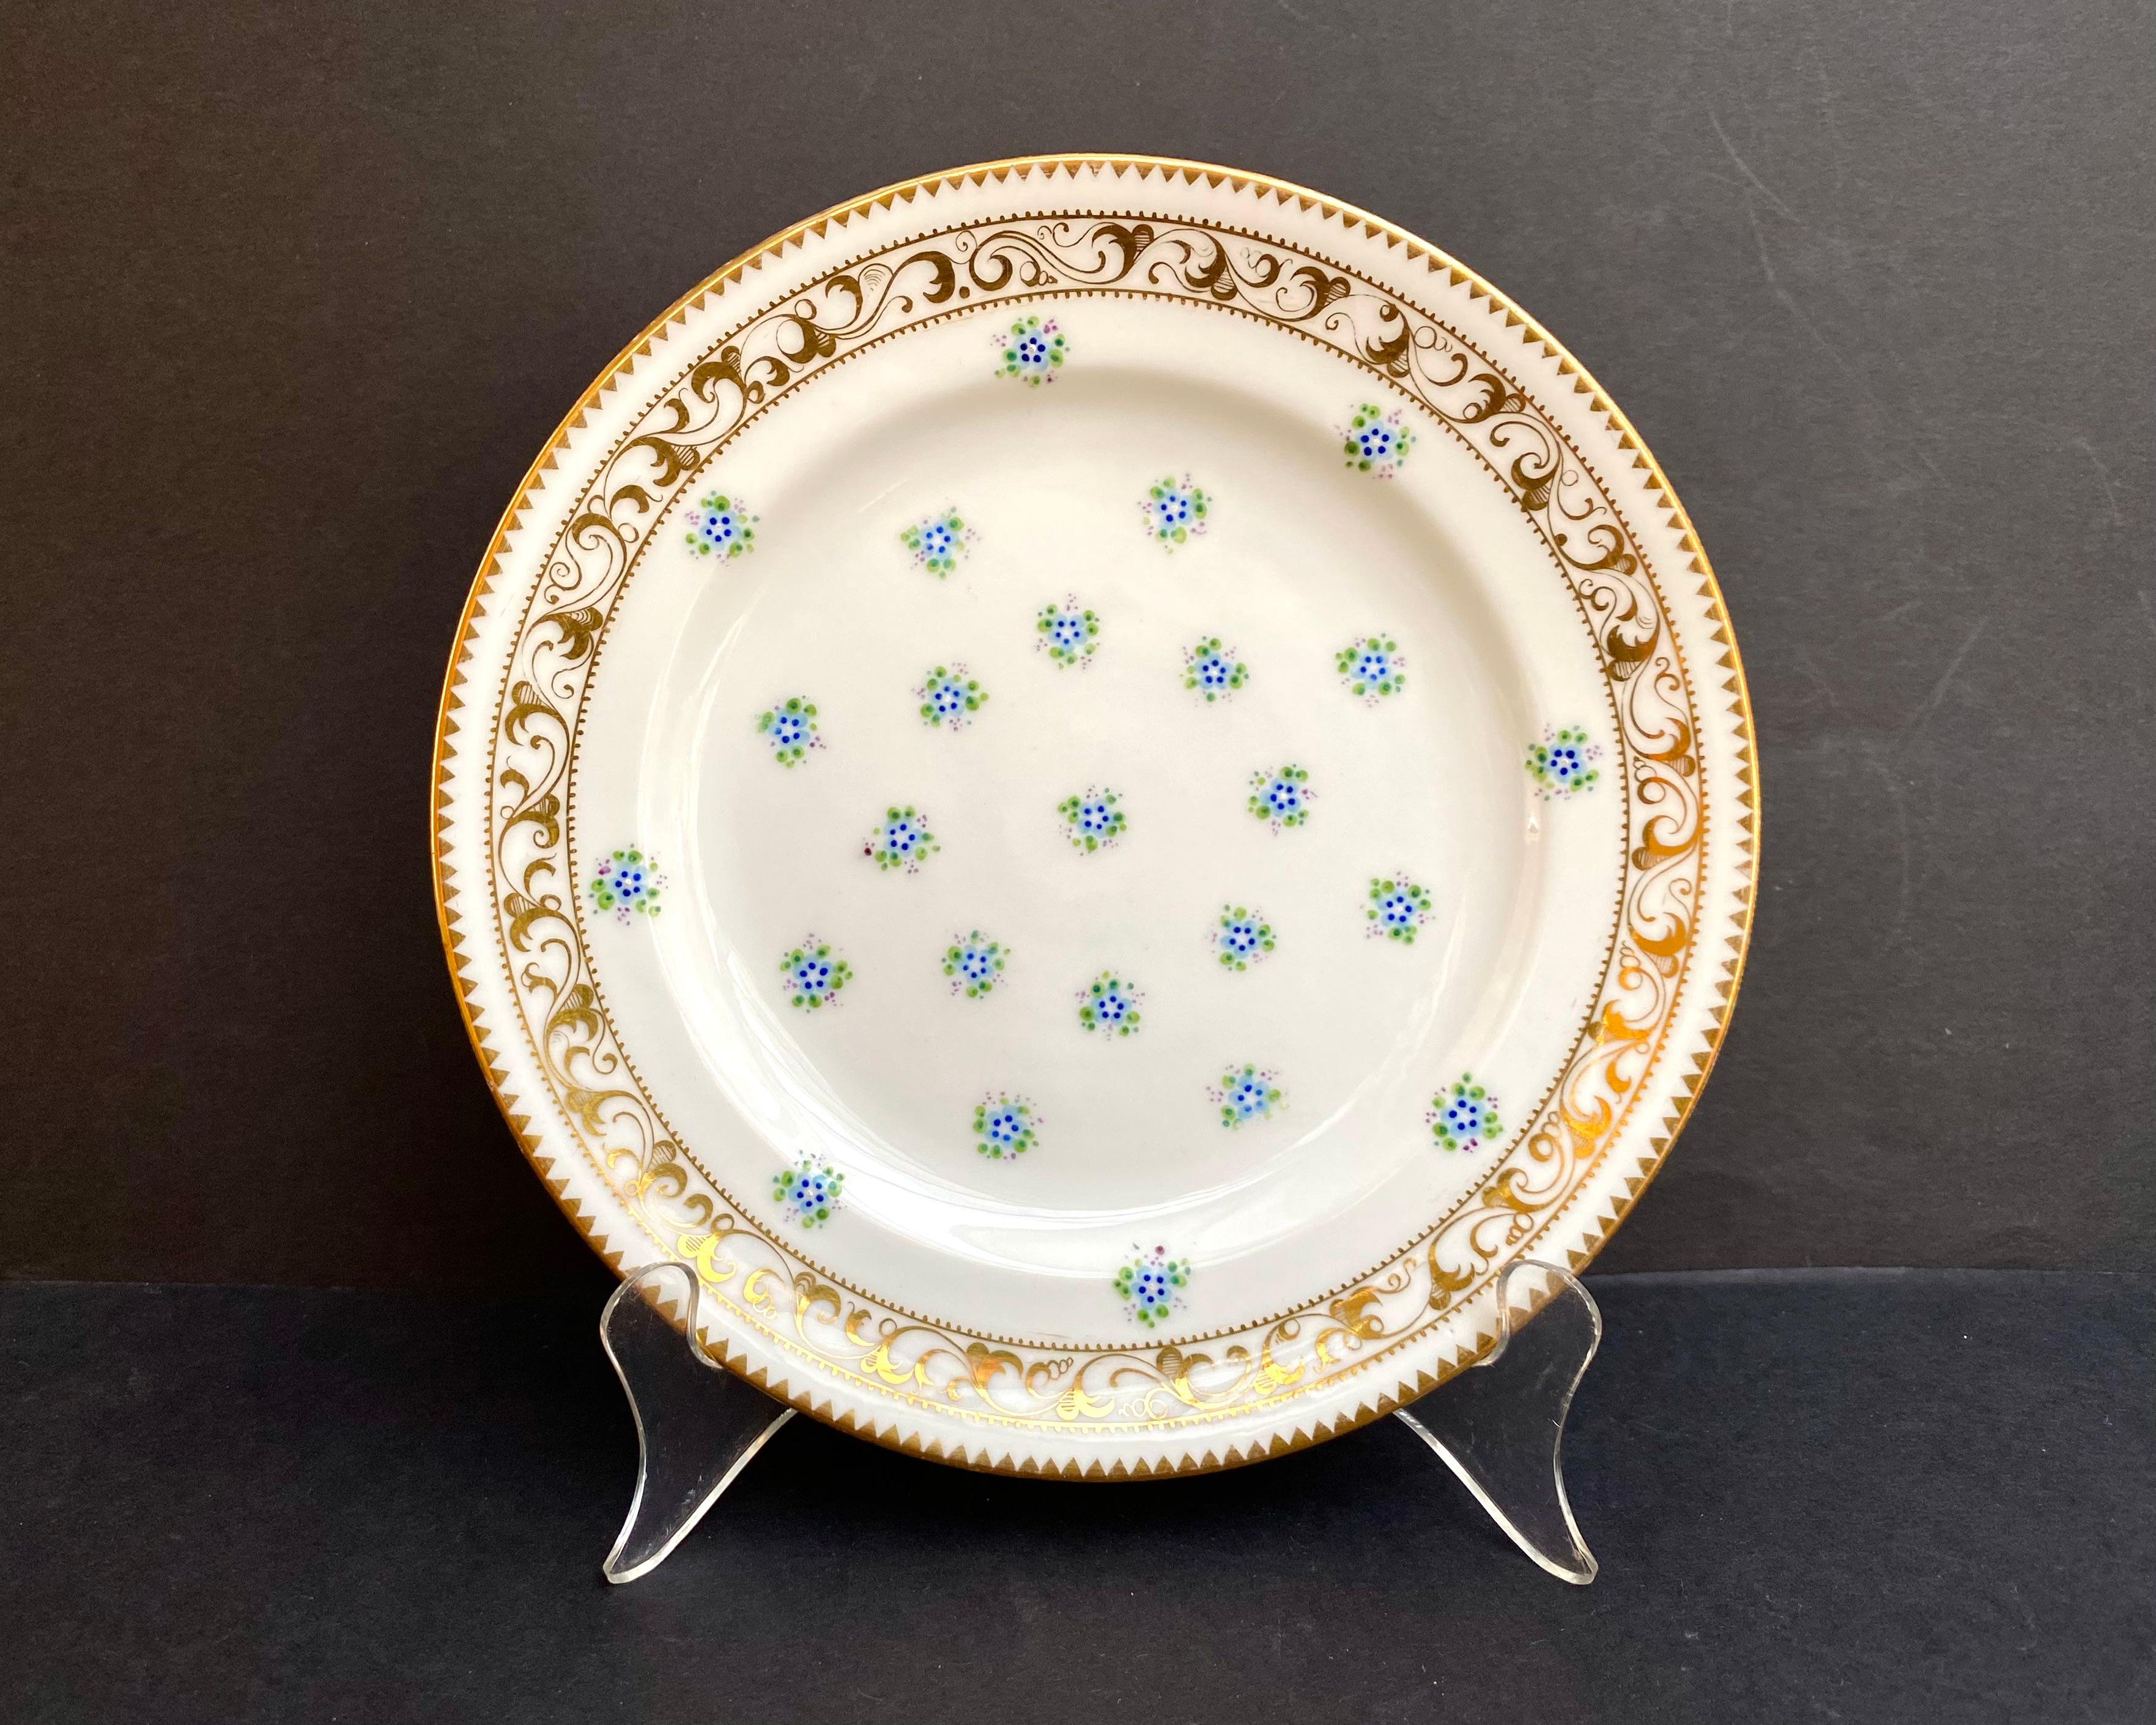 Early 20th Century Dessert Plates Antique Set 6 Hand-Painted Plates in Porcelain France, 1930s